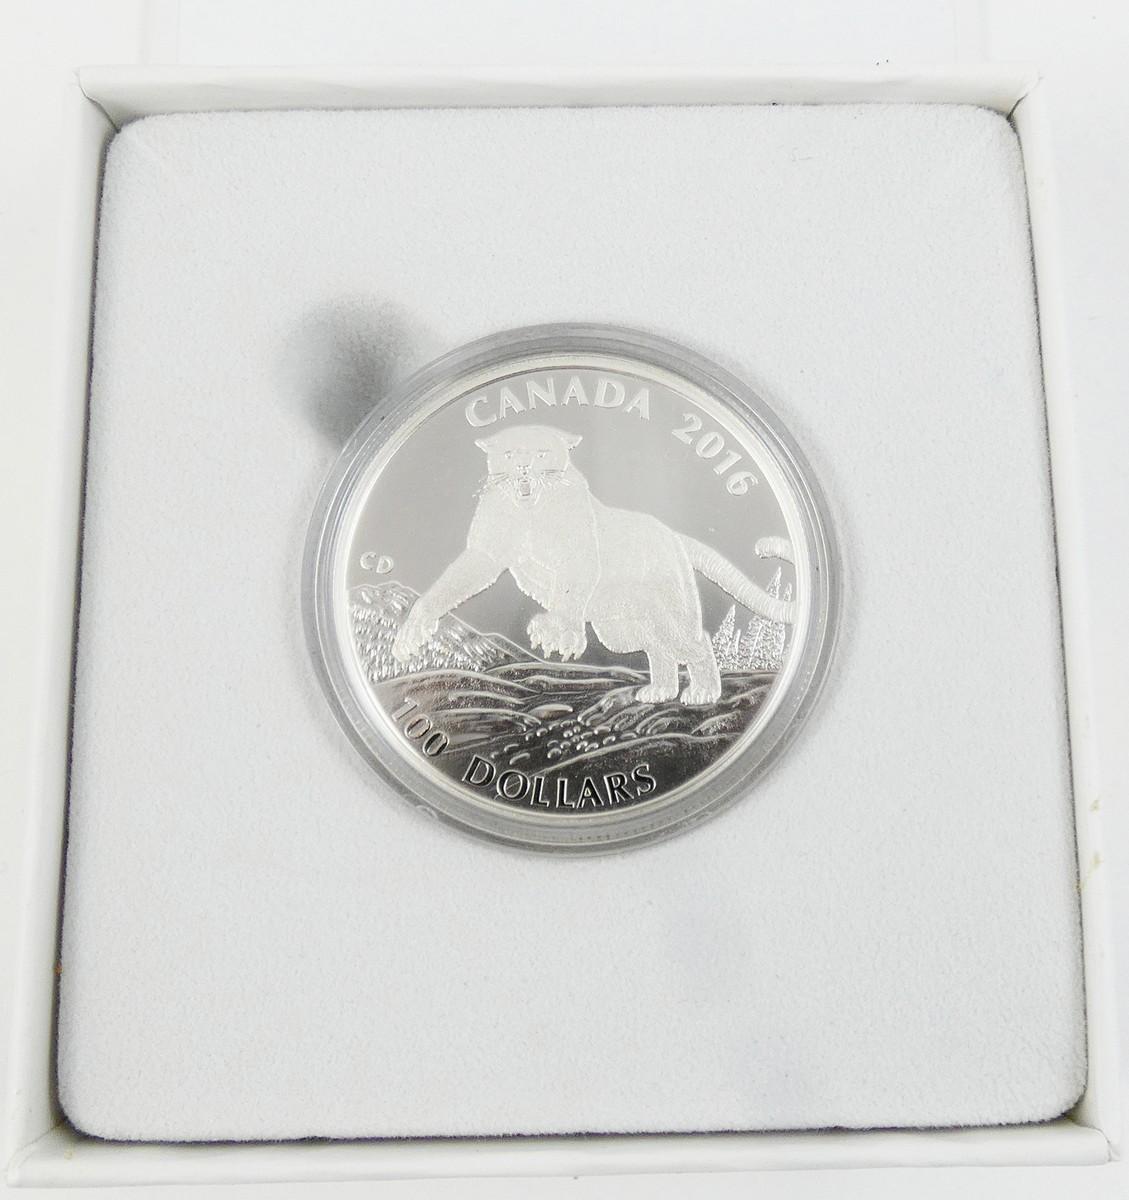 CANADIAN $100 SILVER COIN - no tax